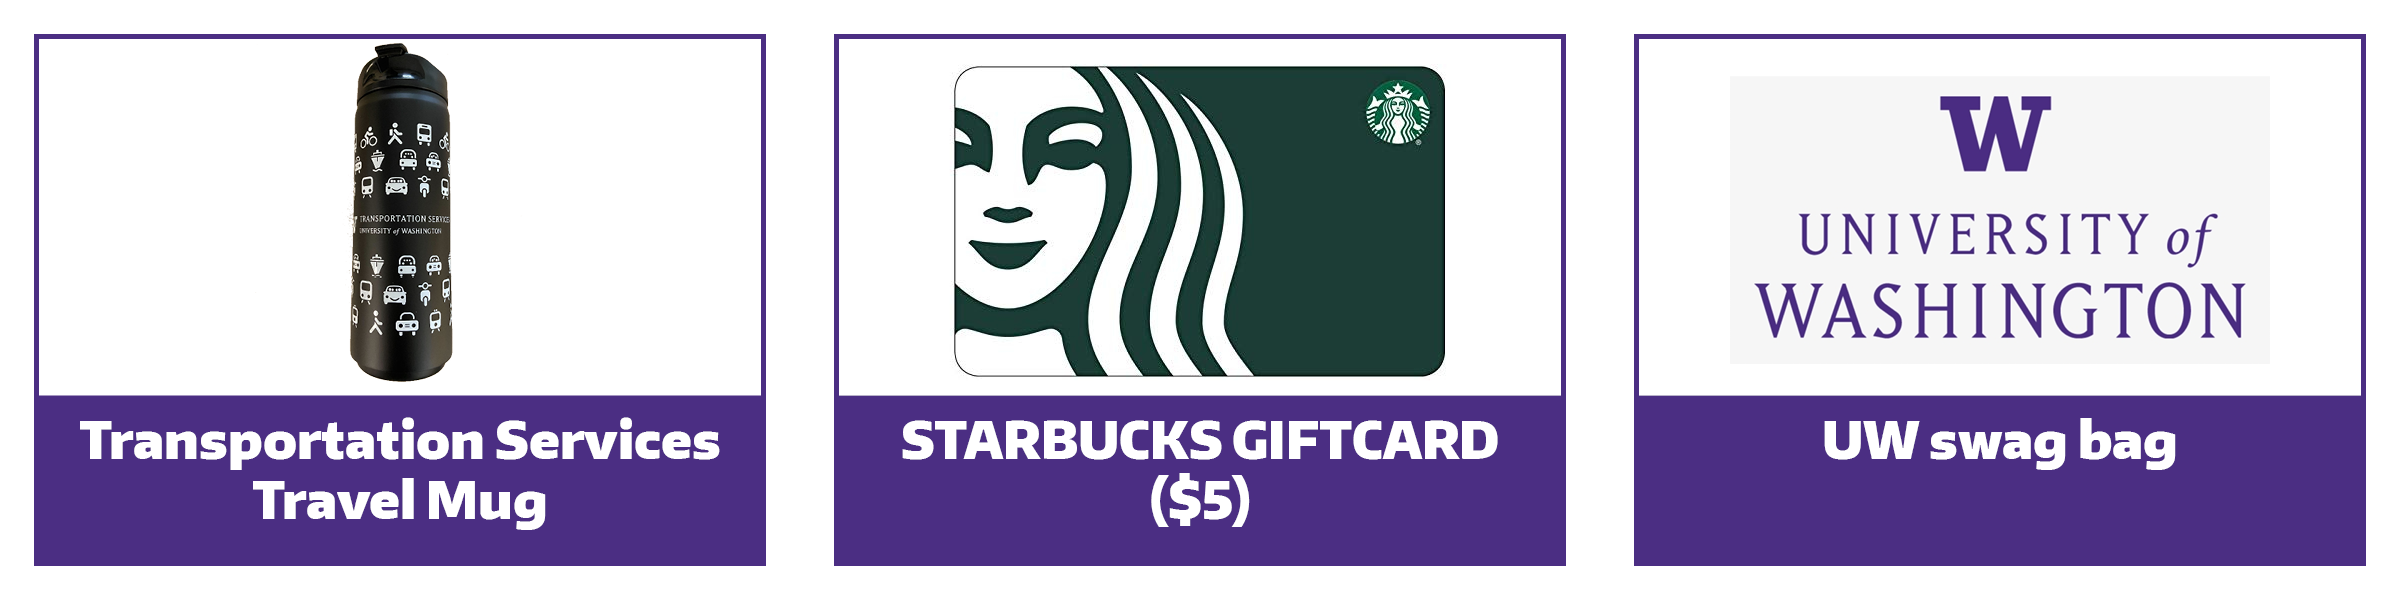 Images of the Week 1 Prizes: a Transportation Services travel mug, with icons of cars, busses, and bicycles; an image of a starbucks gift card, and an image of the UW logo 